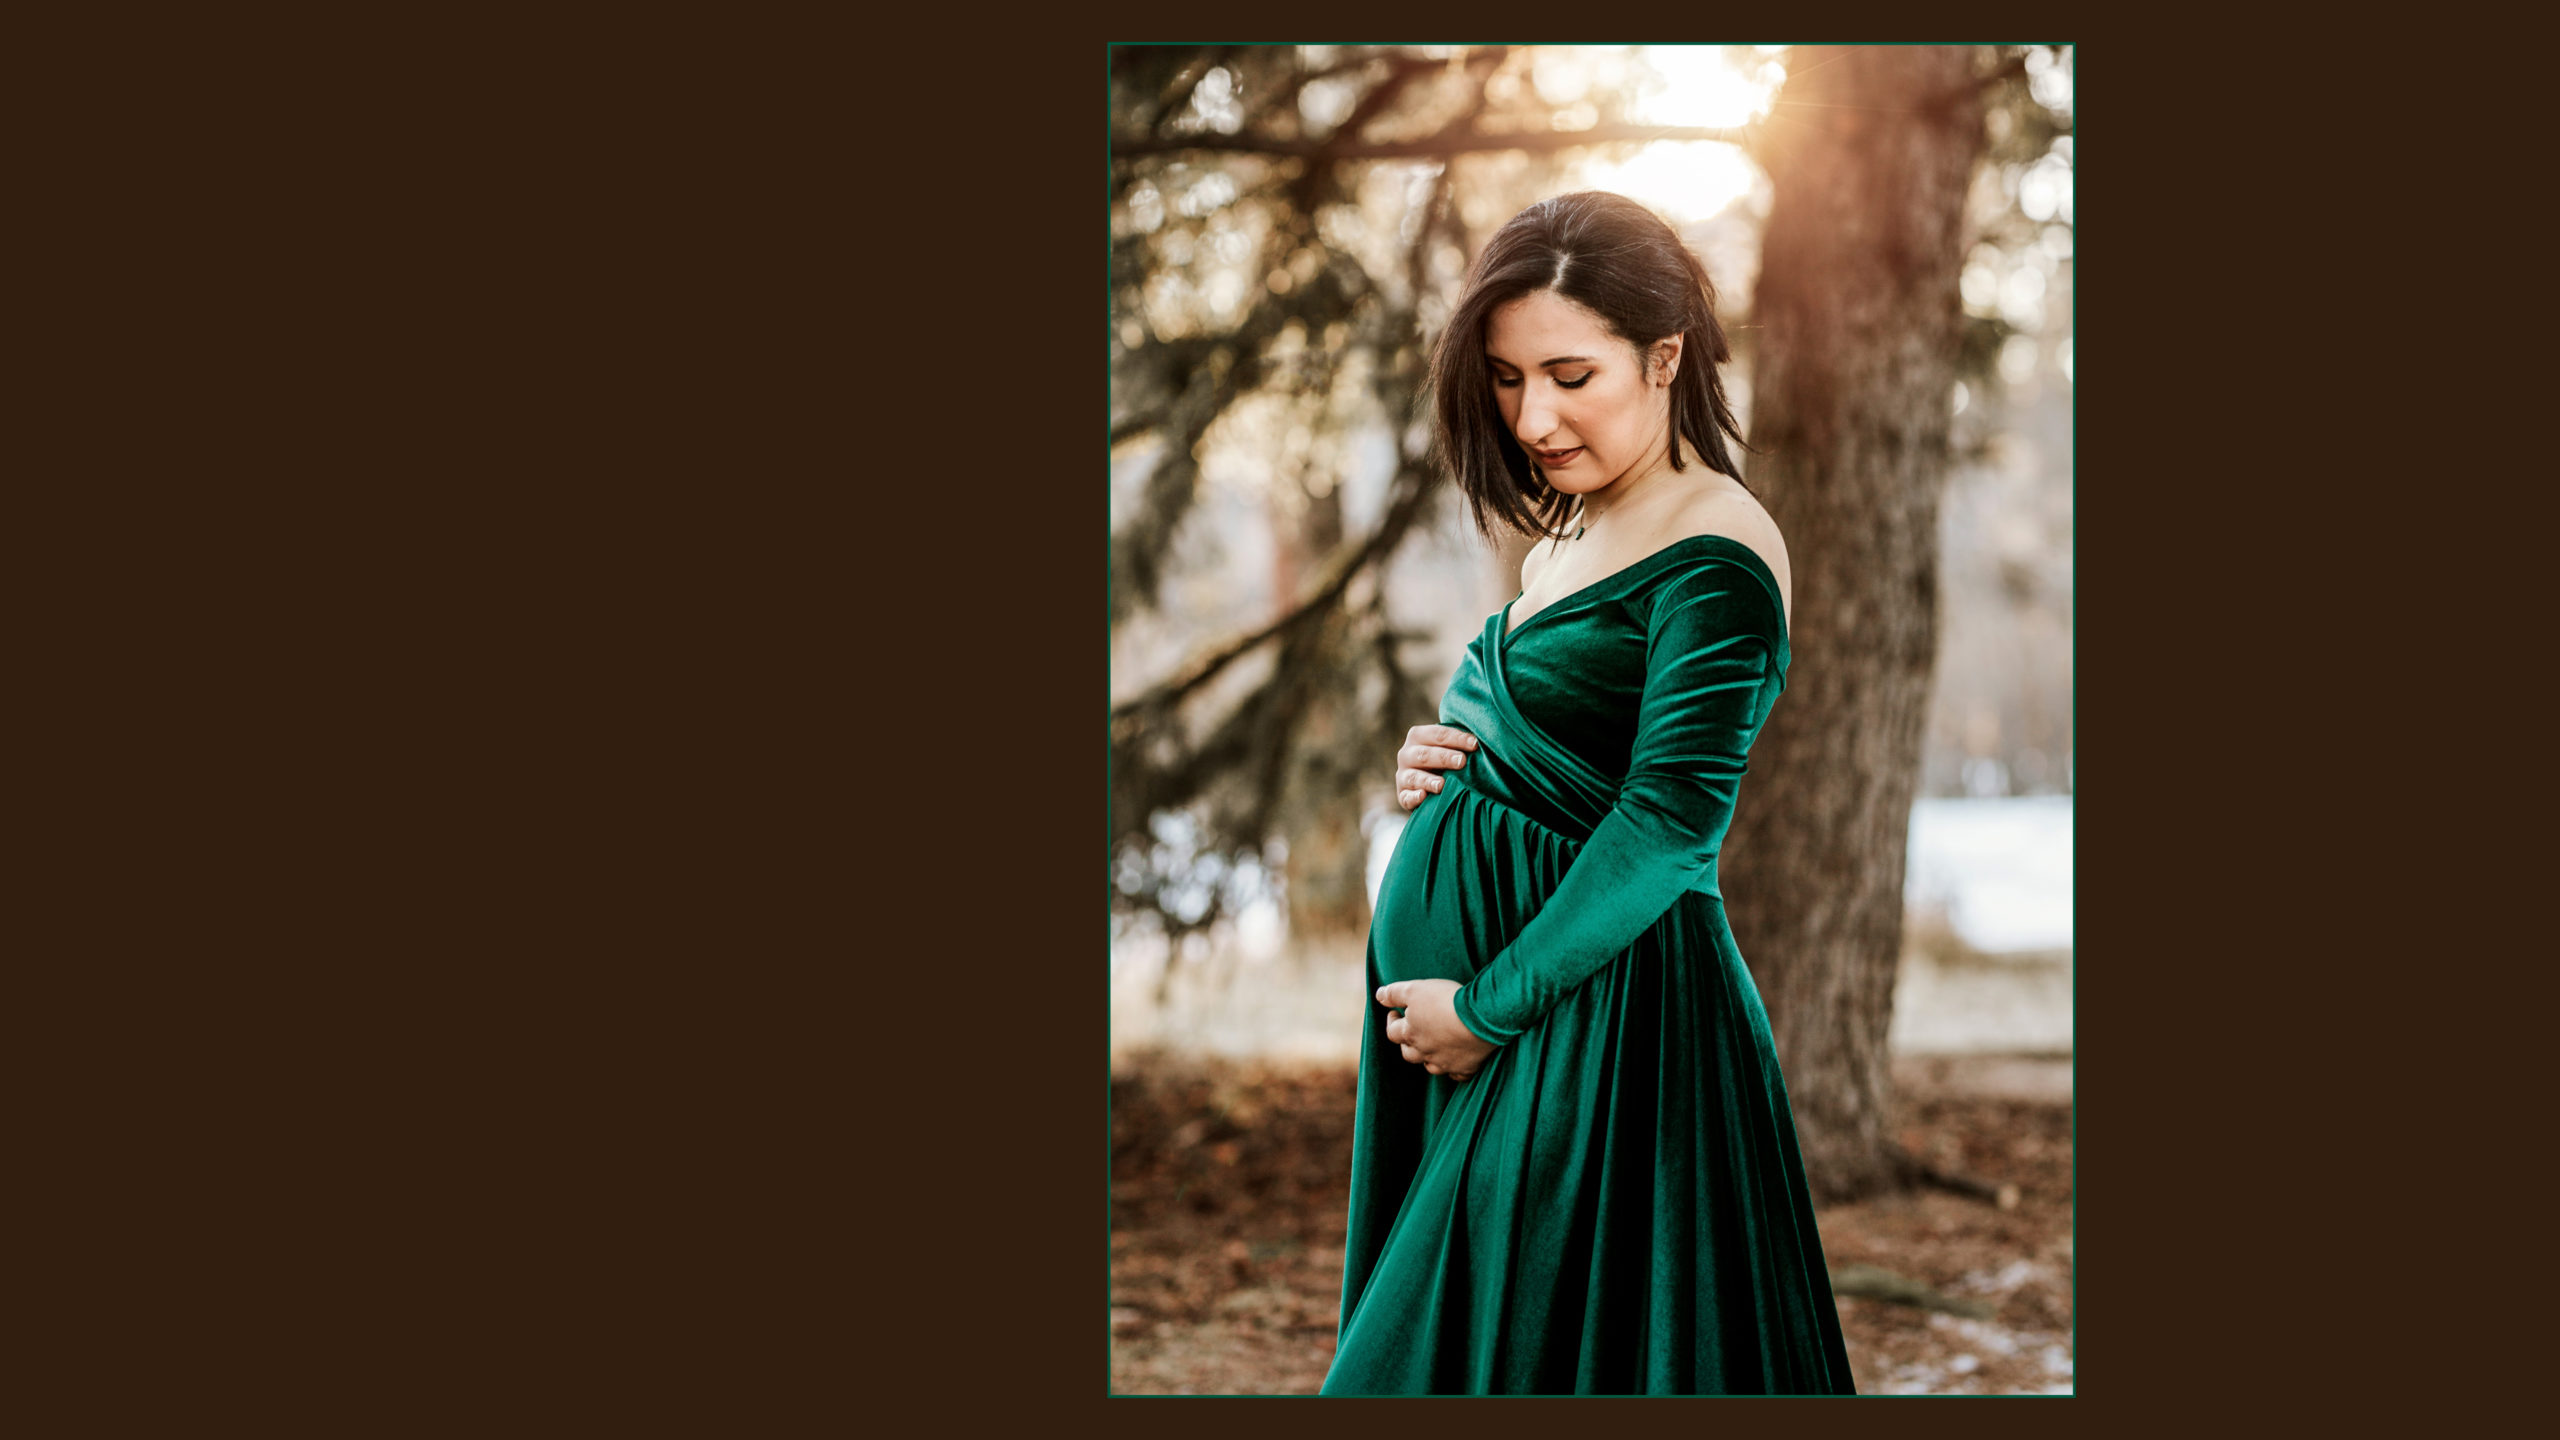 Pregnant lady in a green velvet gown at sunset -Belliam Photos Maternity Closet